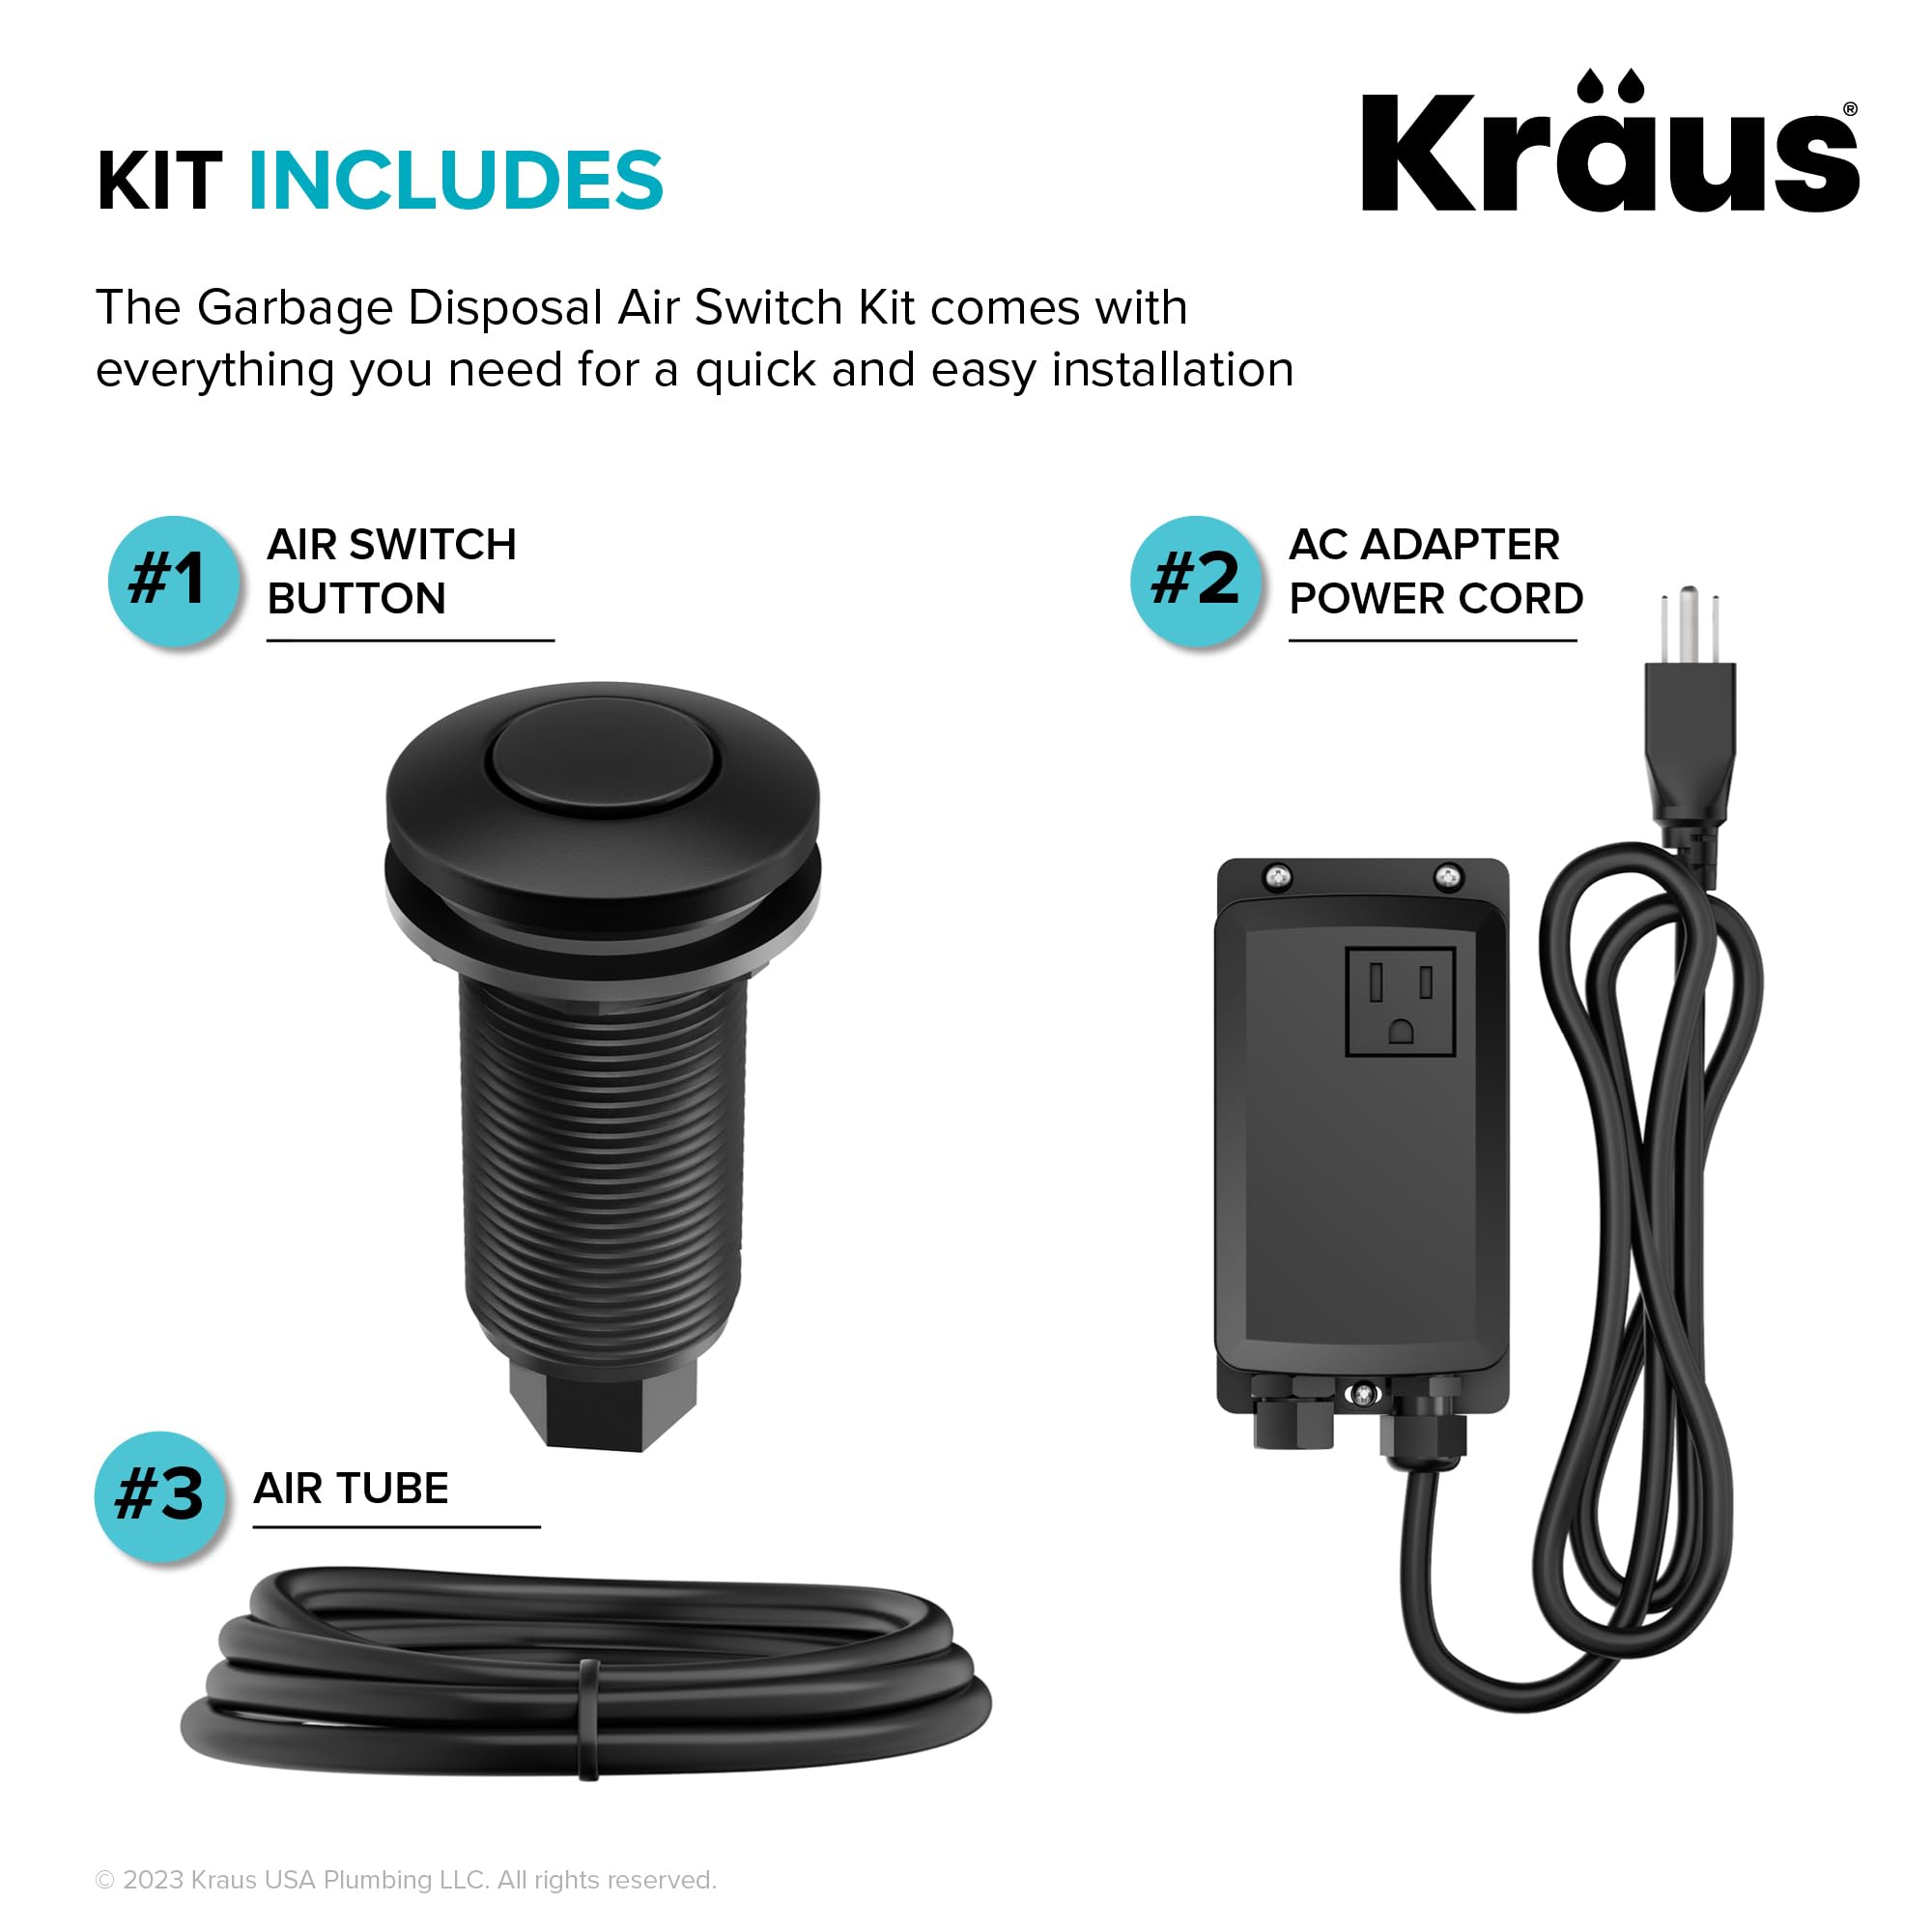 KRAUS Garbage Disposal Air Switch Kit in Matte Black with Push Button, AC Adapter, Power Cord, and Air Tube Included, KWDA-100MB